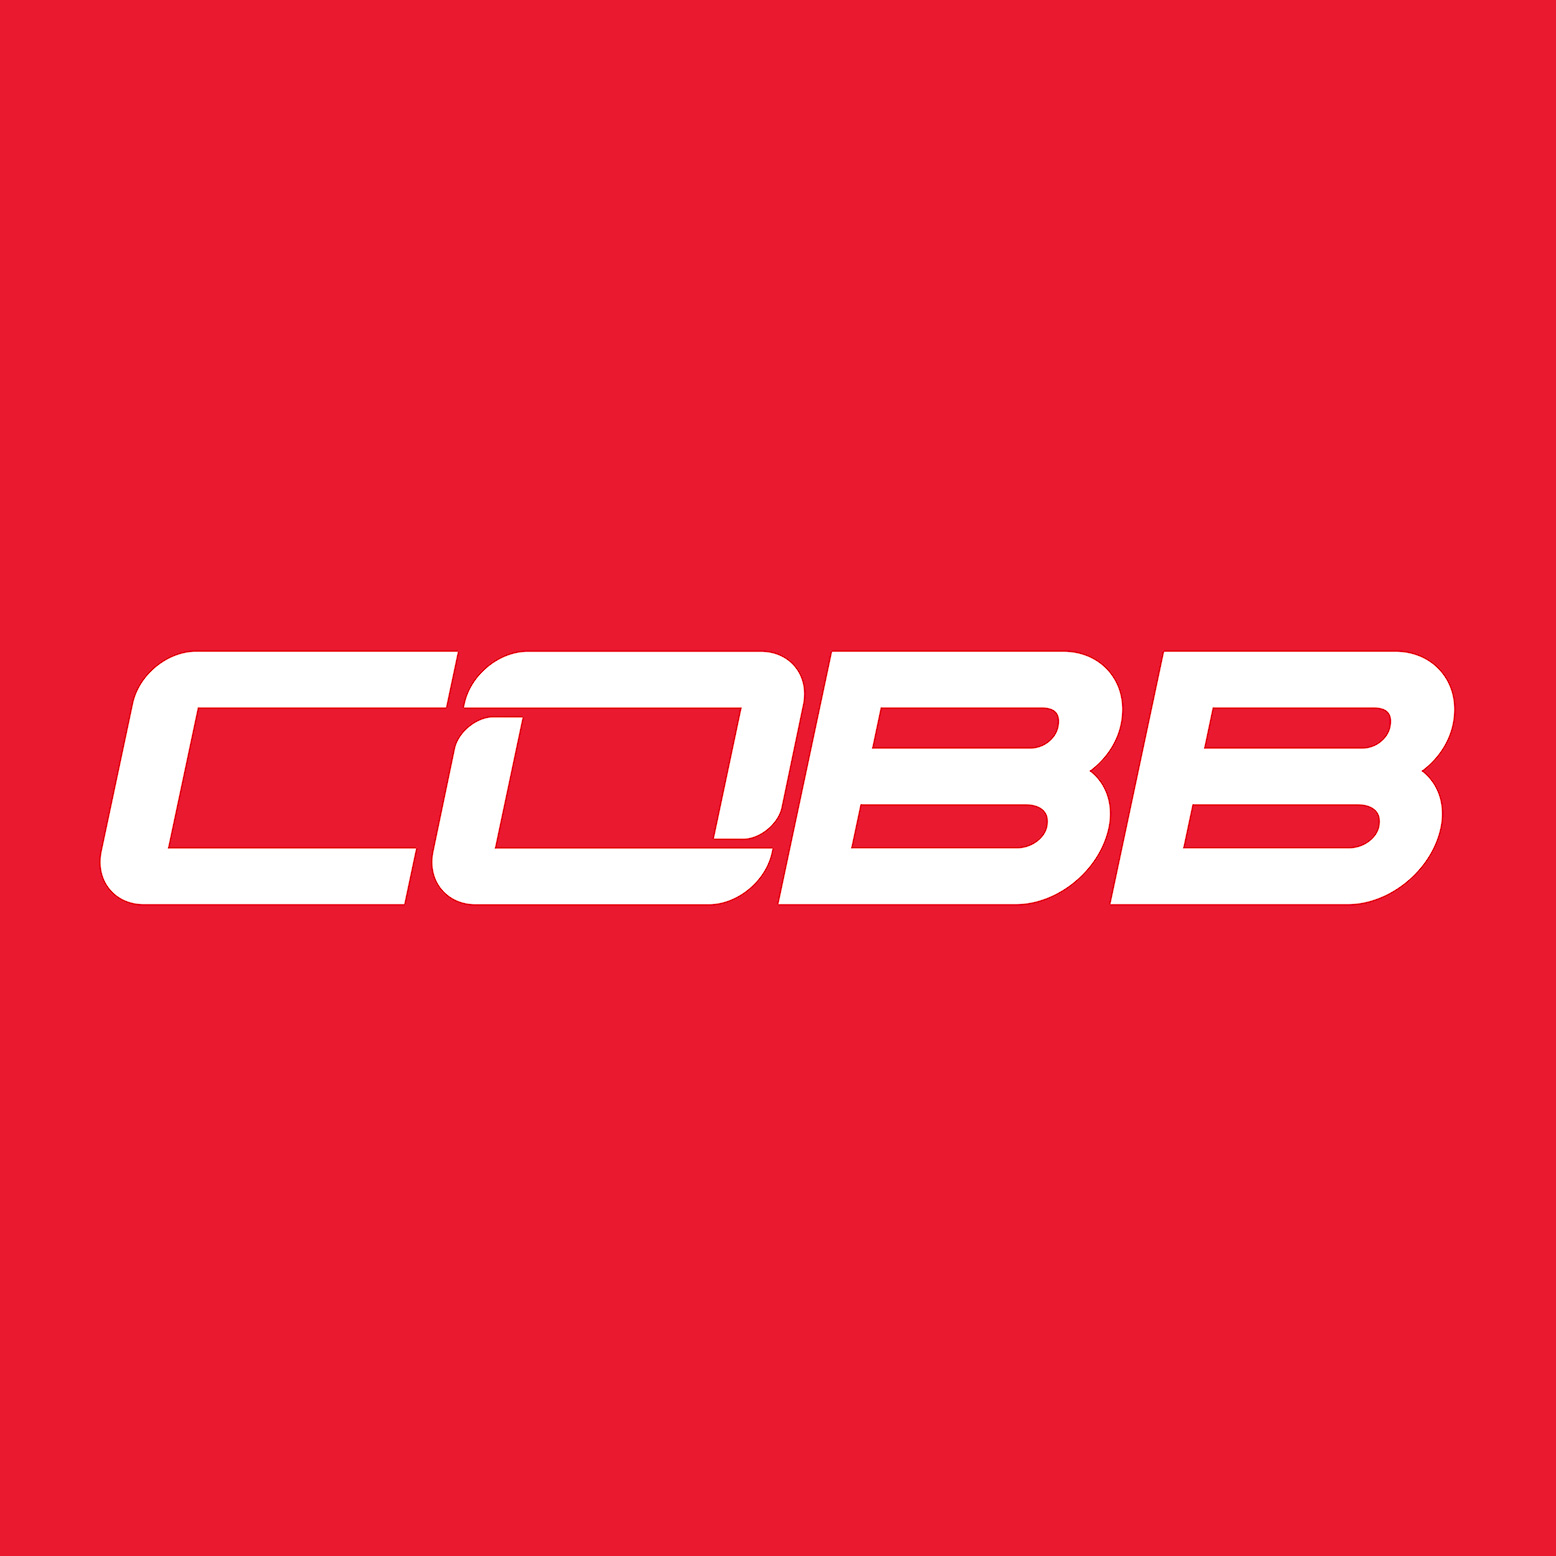 COBB Colored Logo with Gray Scale